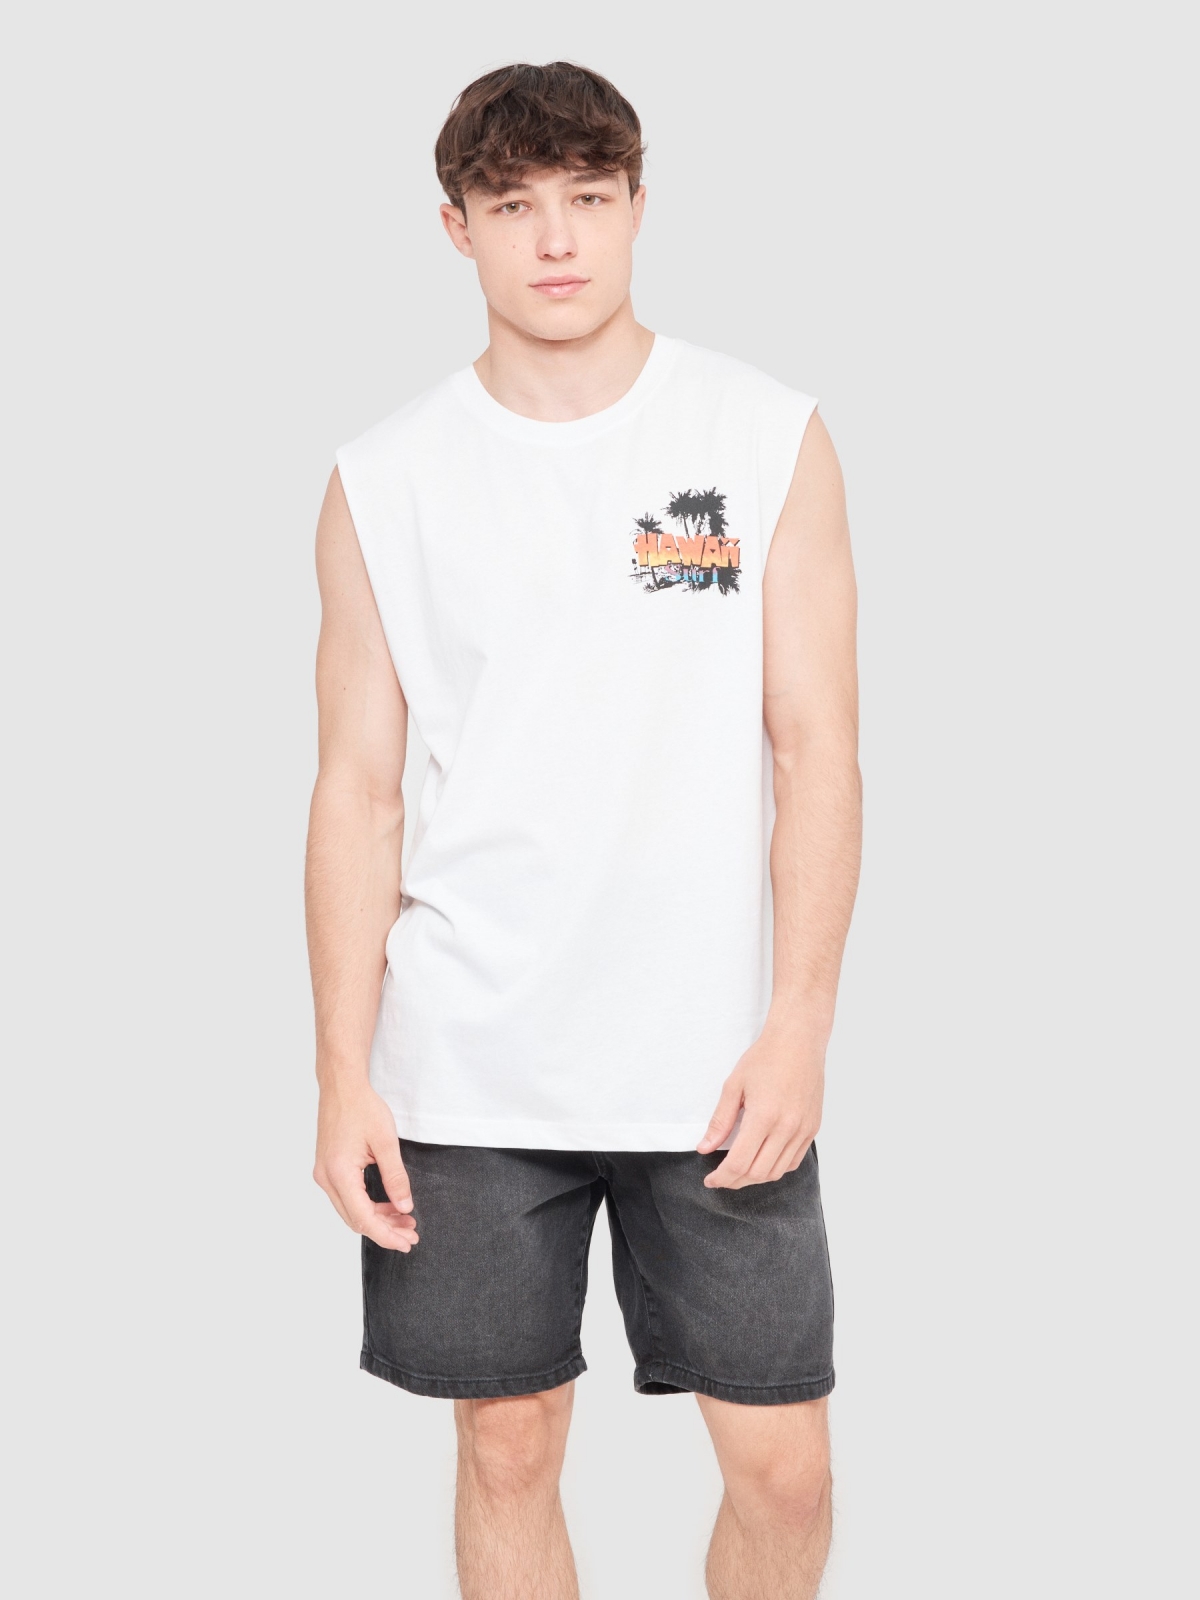 Hawaii sleeveless T-shirt white middle front view